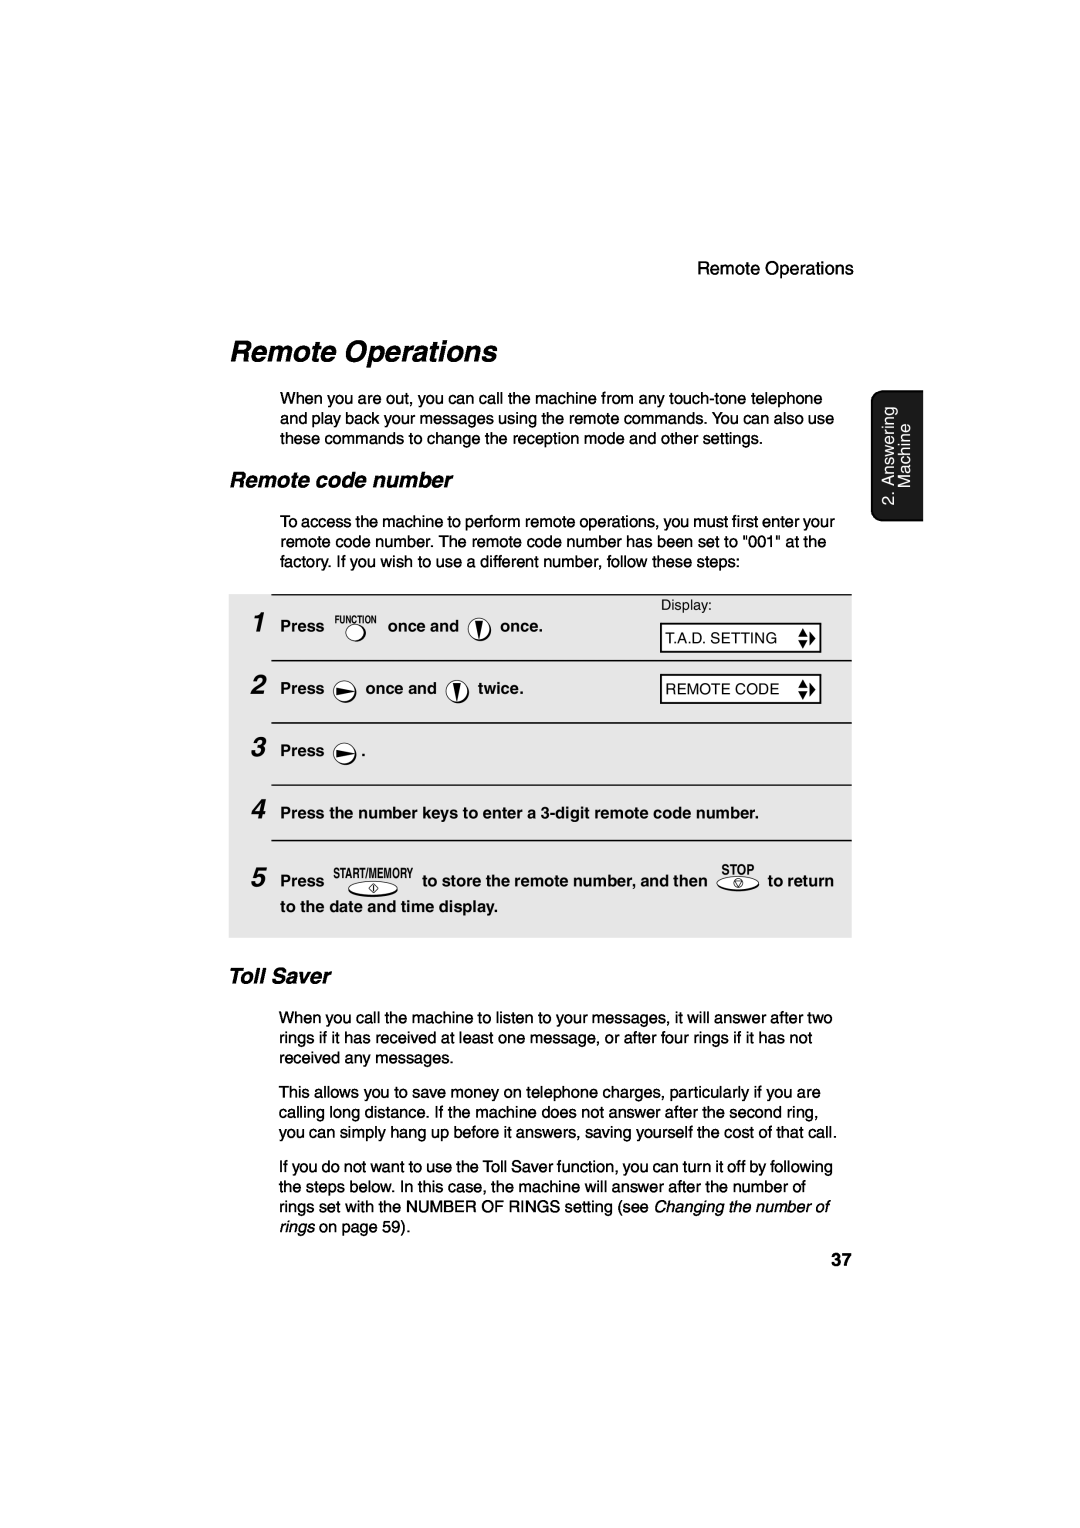 Sharp UX-A260 manual Remote Operations, Remote code number, Toll Saver, Answering, Machine 